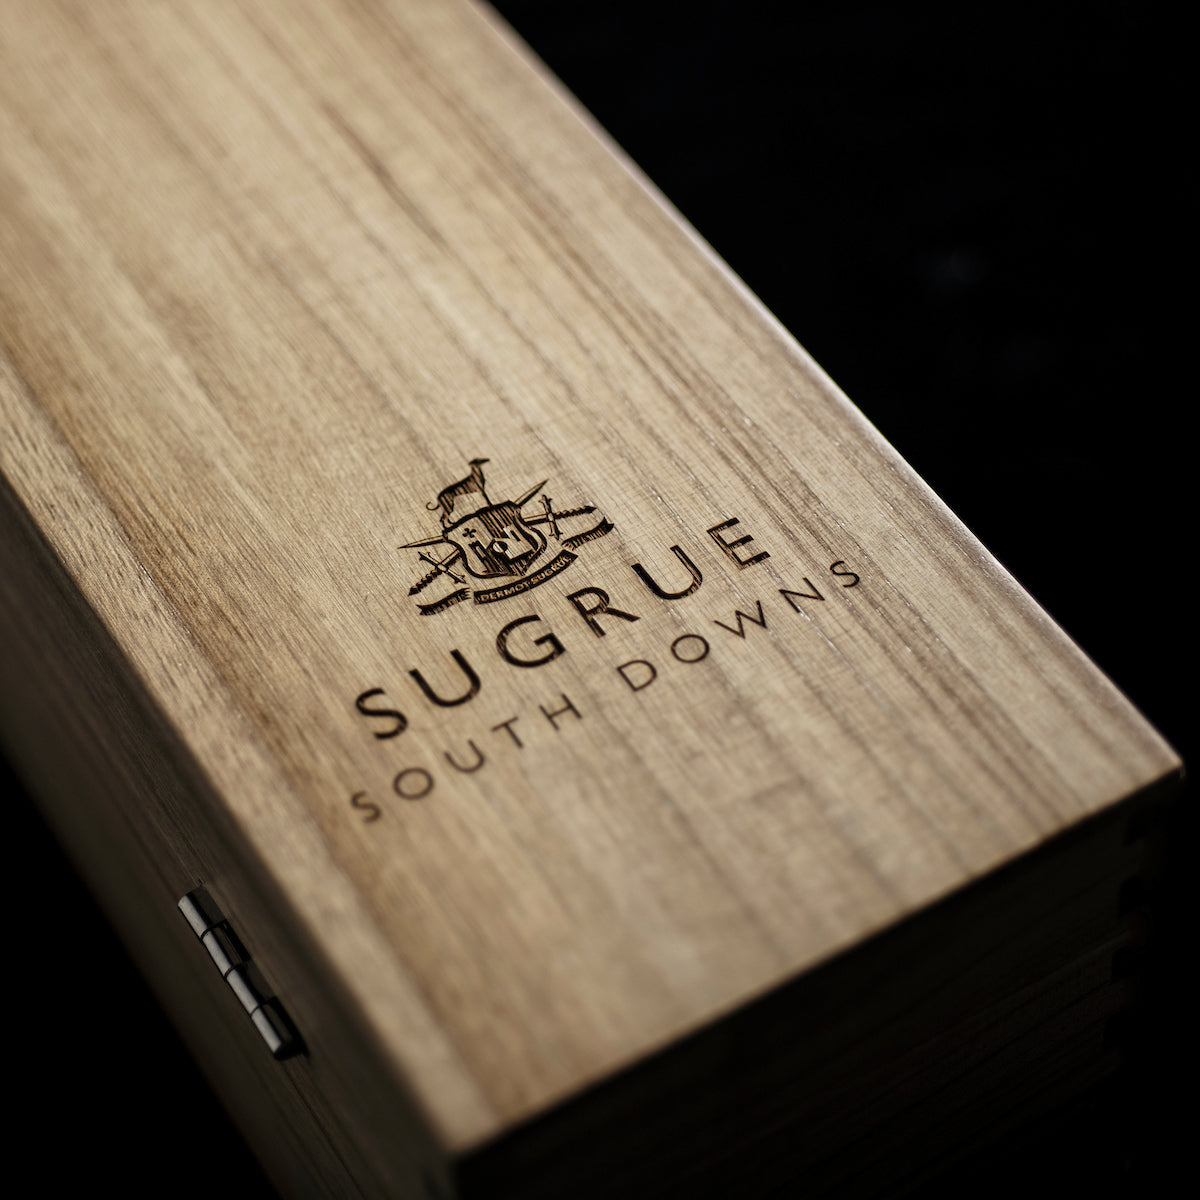 SUGRUE MAGNUM WOODEN GIFT BOX